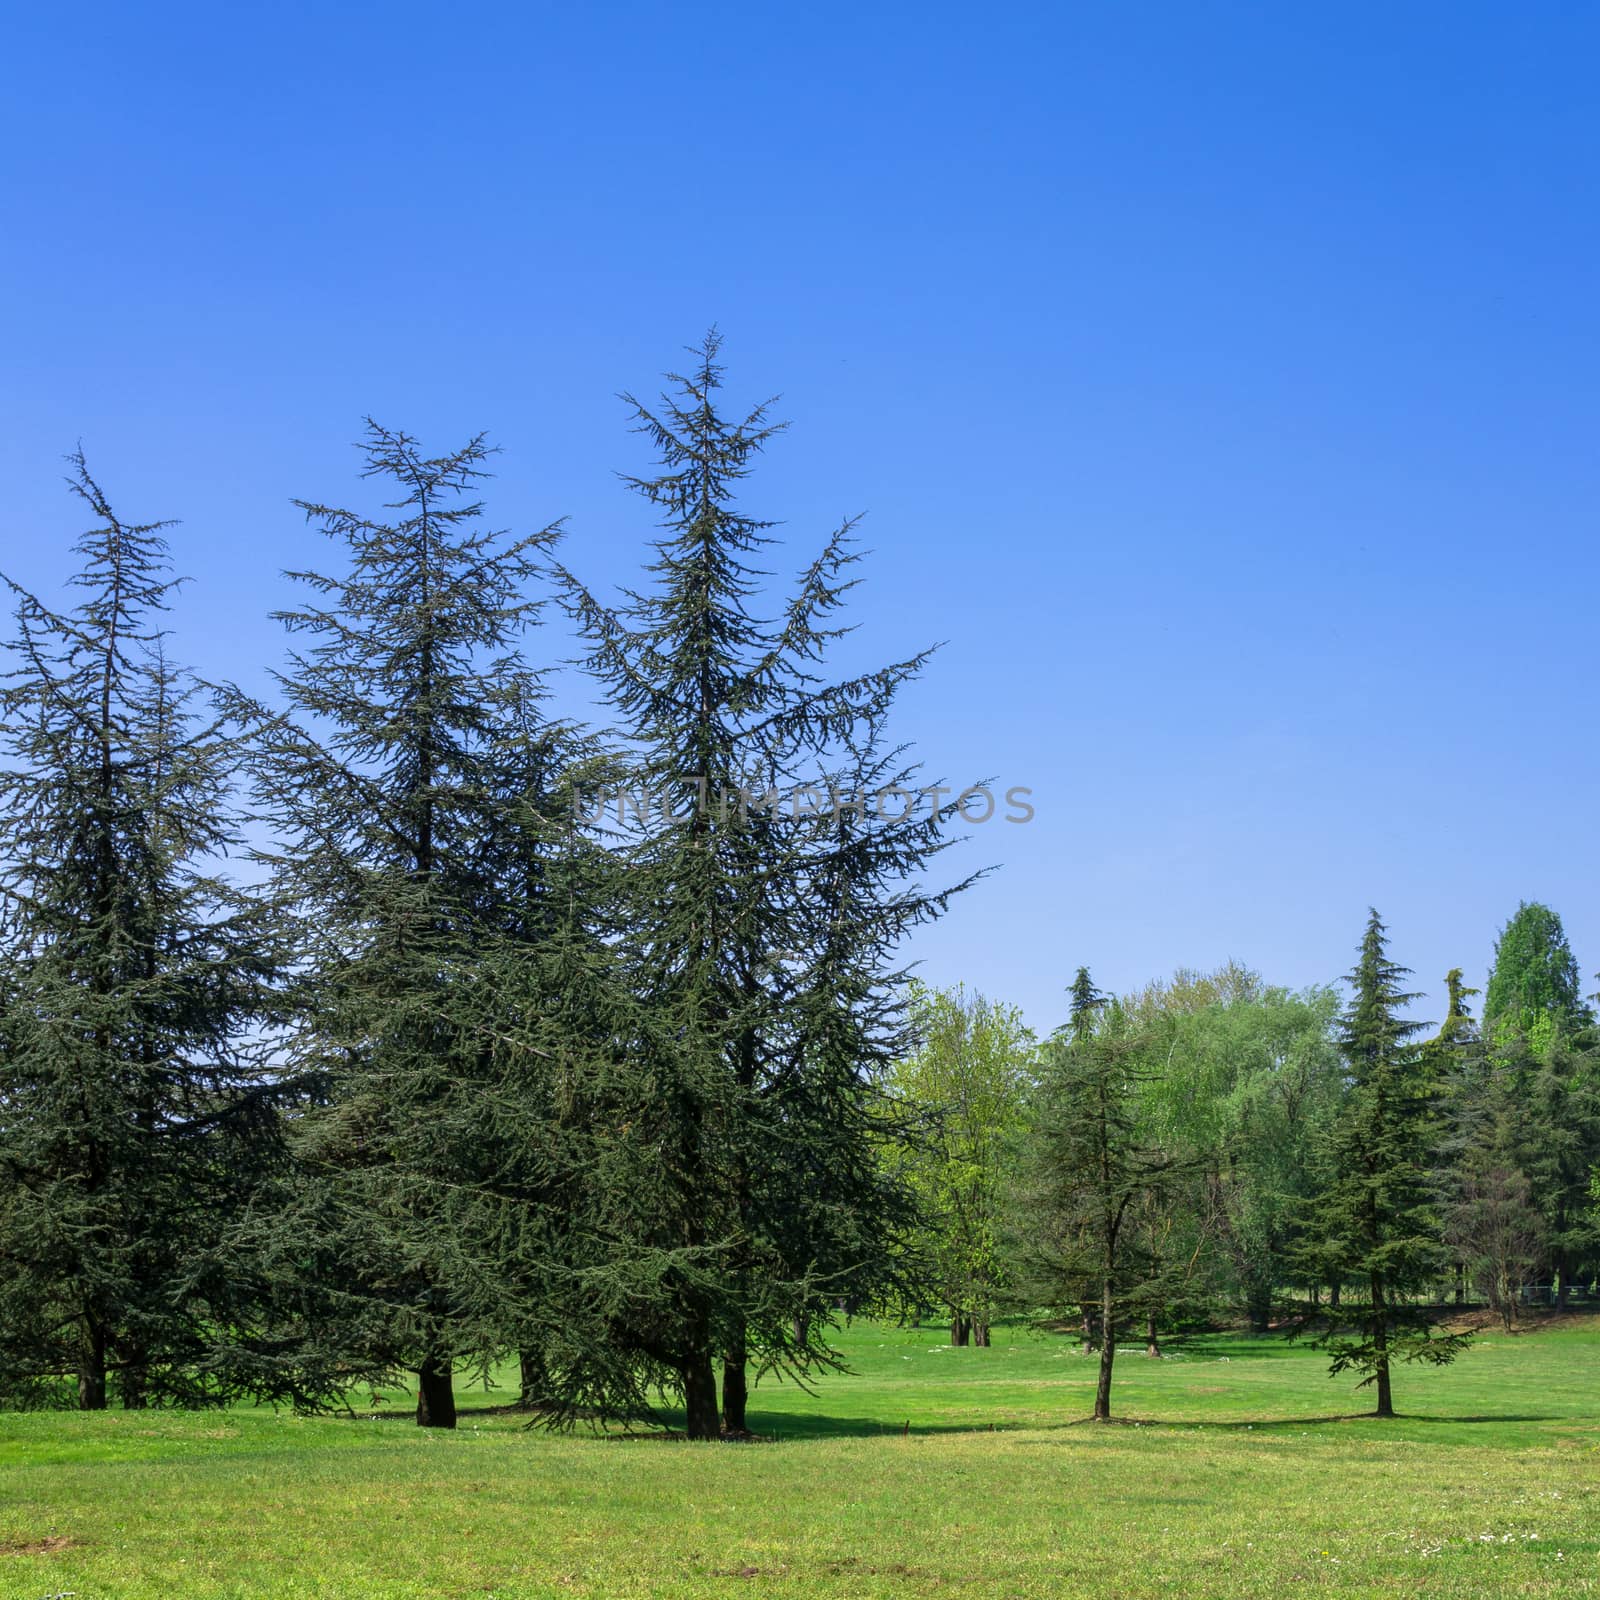 Field and forest in spring time by germanopoli